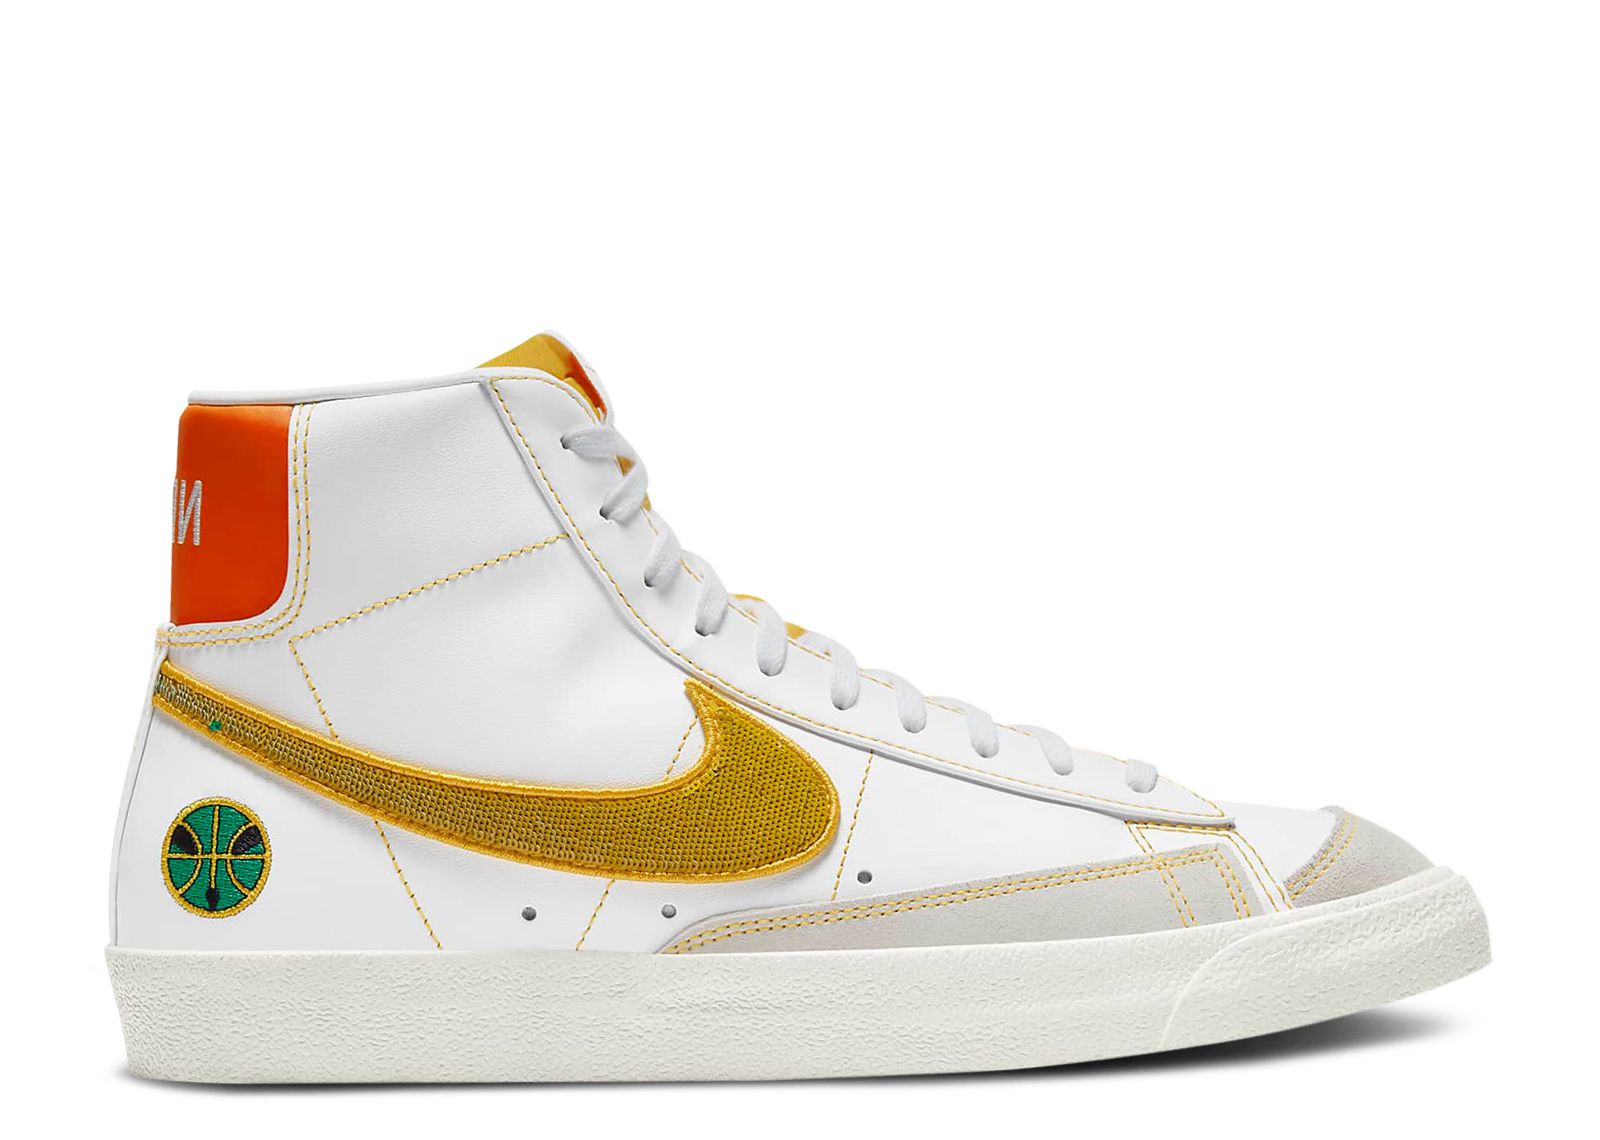 Кроссовки Nike Blazer Mid '77 Vintage 'Roswell Rayguns', белый nike blazer mid 77 vintage multi have a good day casual sports skateboard shoes for men unisex women sneaker